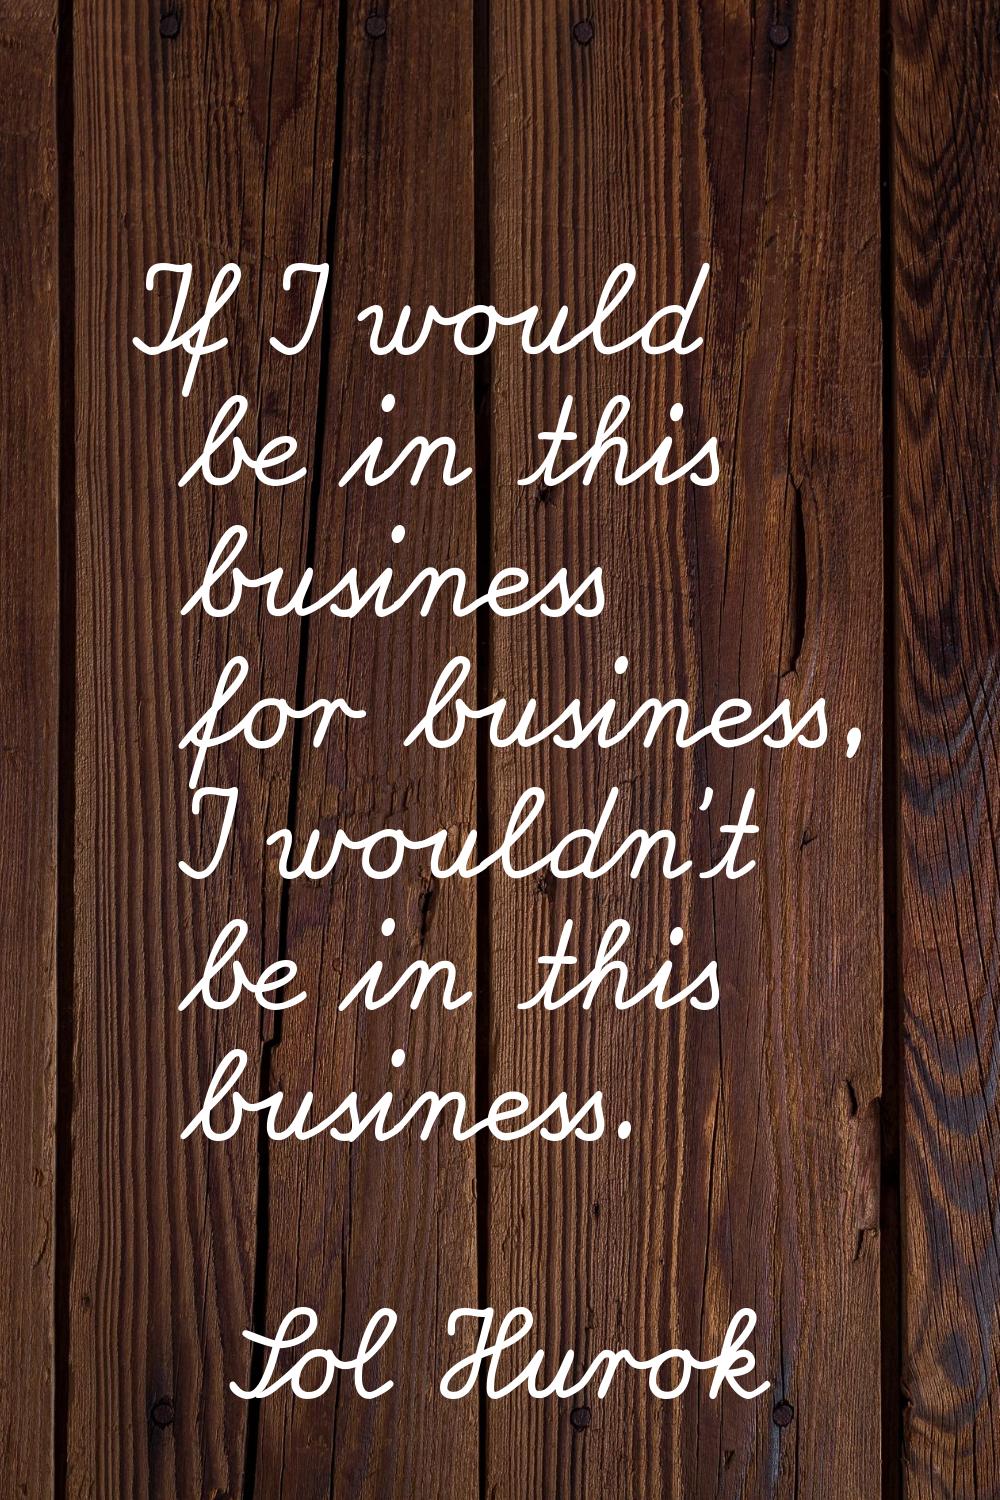 If I would be in this business for business, I wouldn't be in this business.